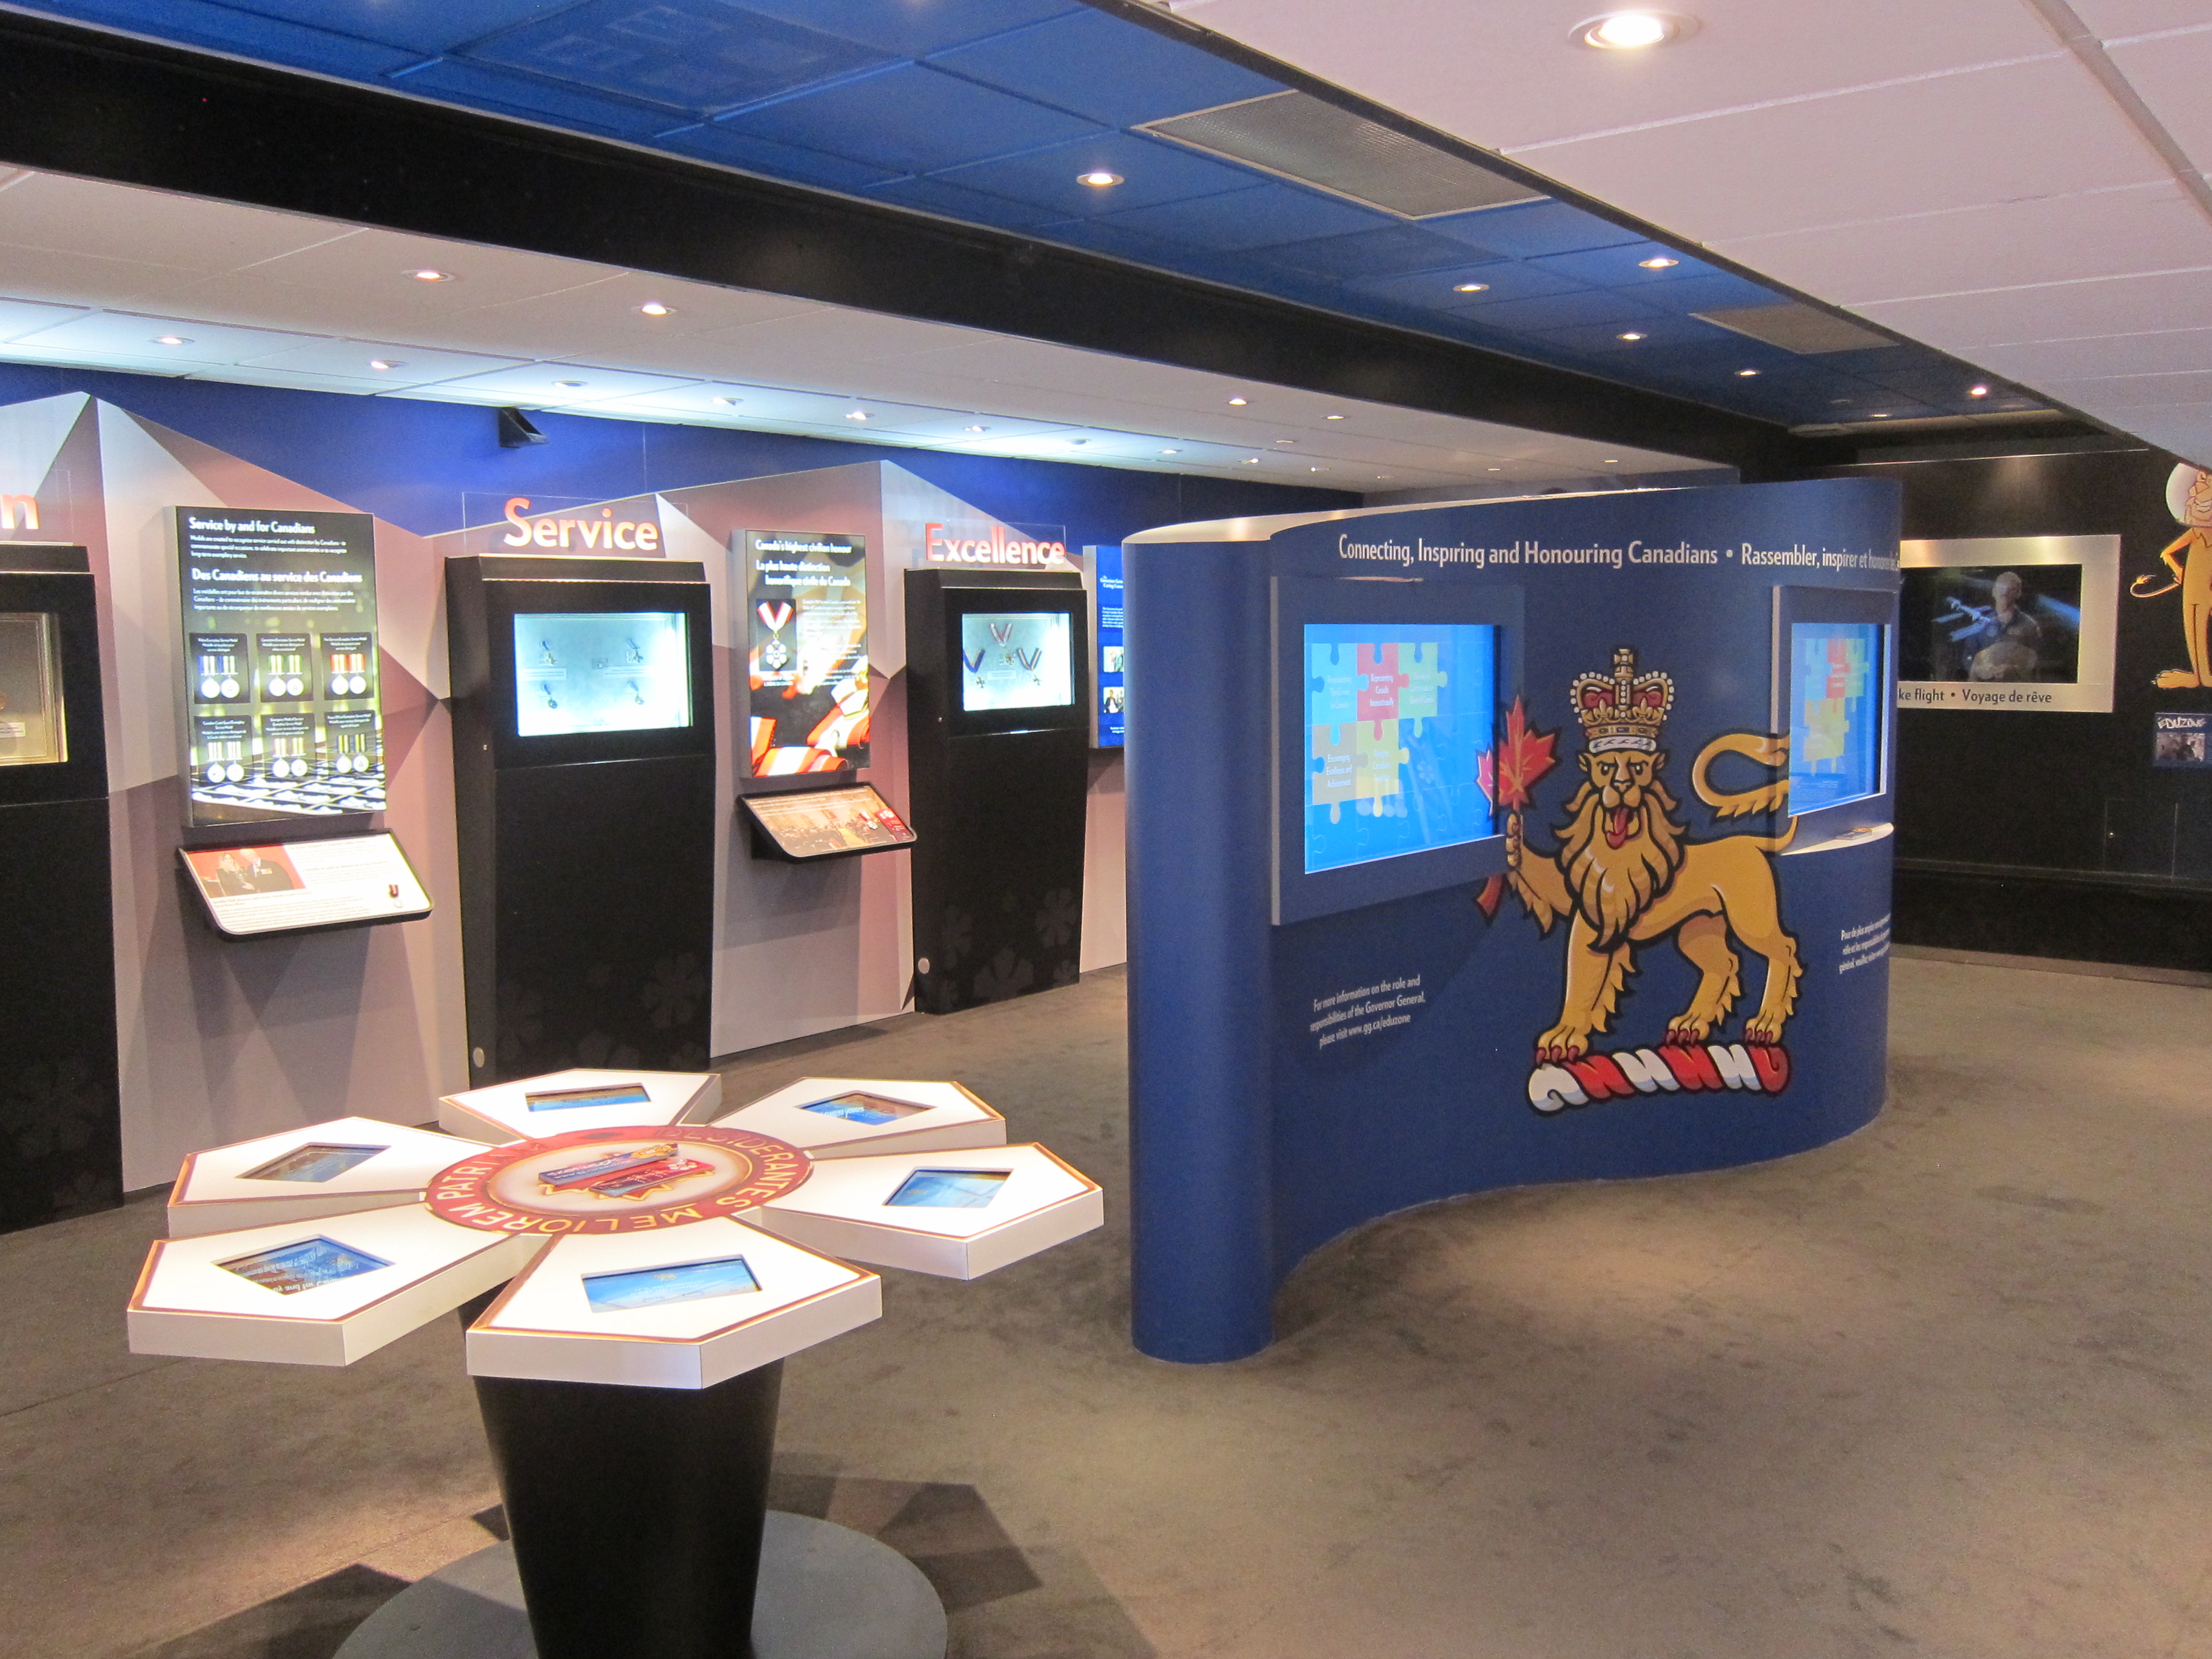 "It's An Honour" educates visitors about the Canadian Honours System through interactive displays, touchscreens, and memorabilia.